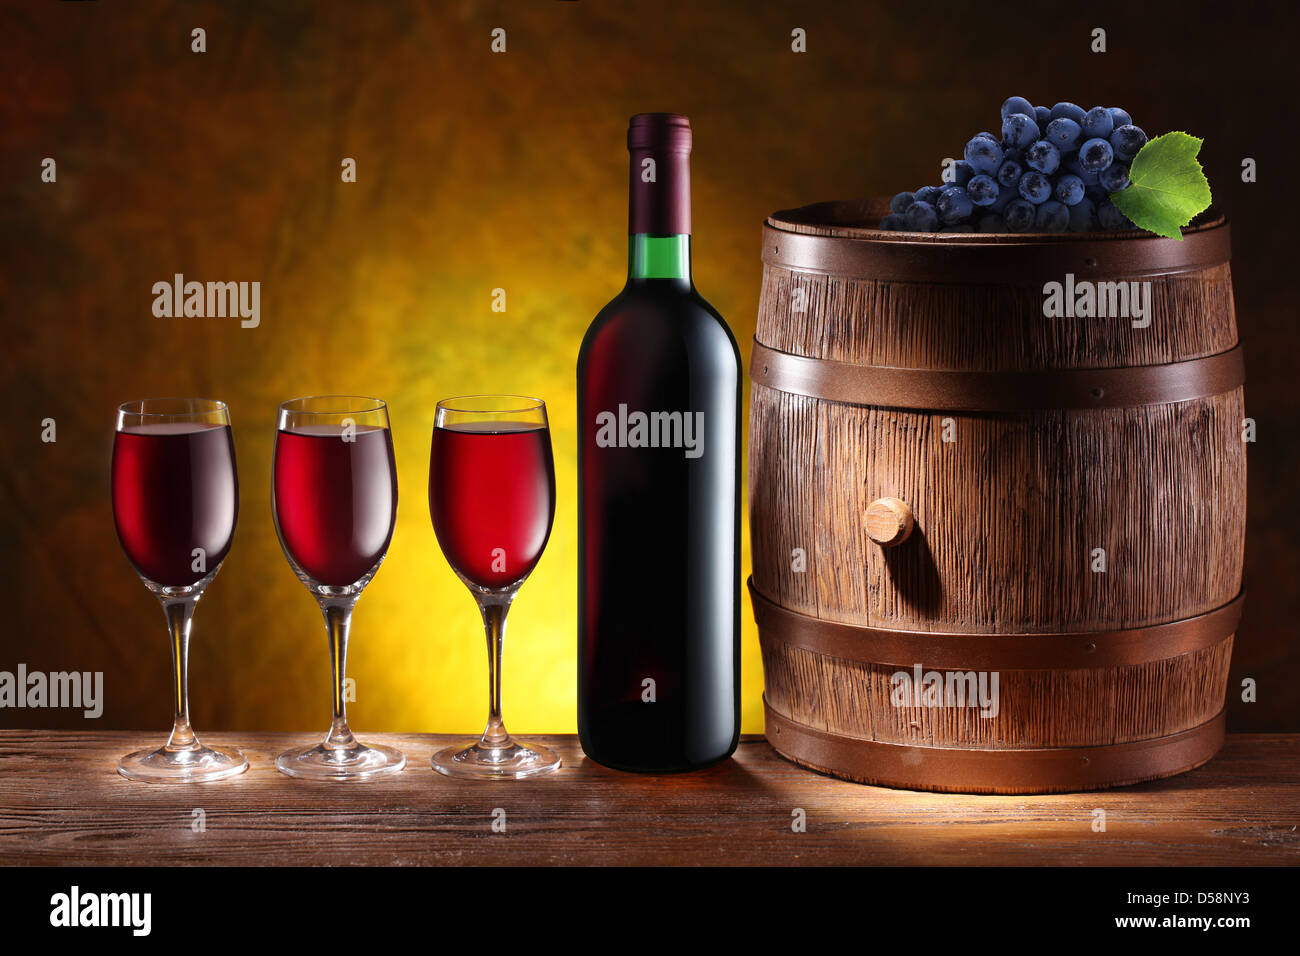 Bottle and a glass of wine with a wooden barrel on dark yellow background with a gradient. Stock Photo